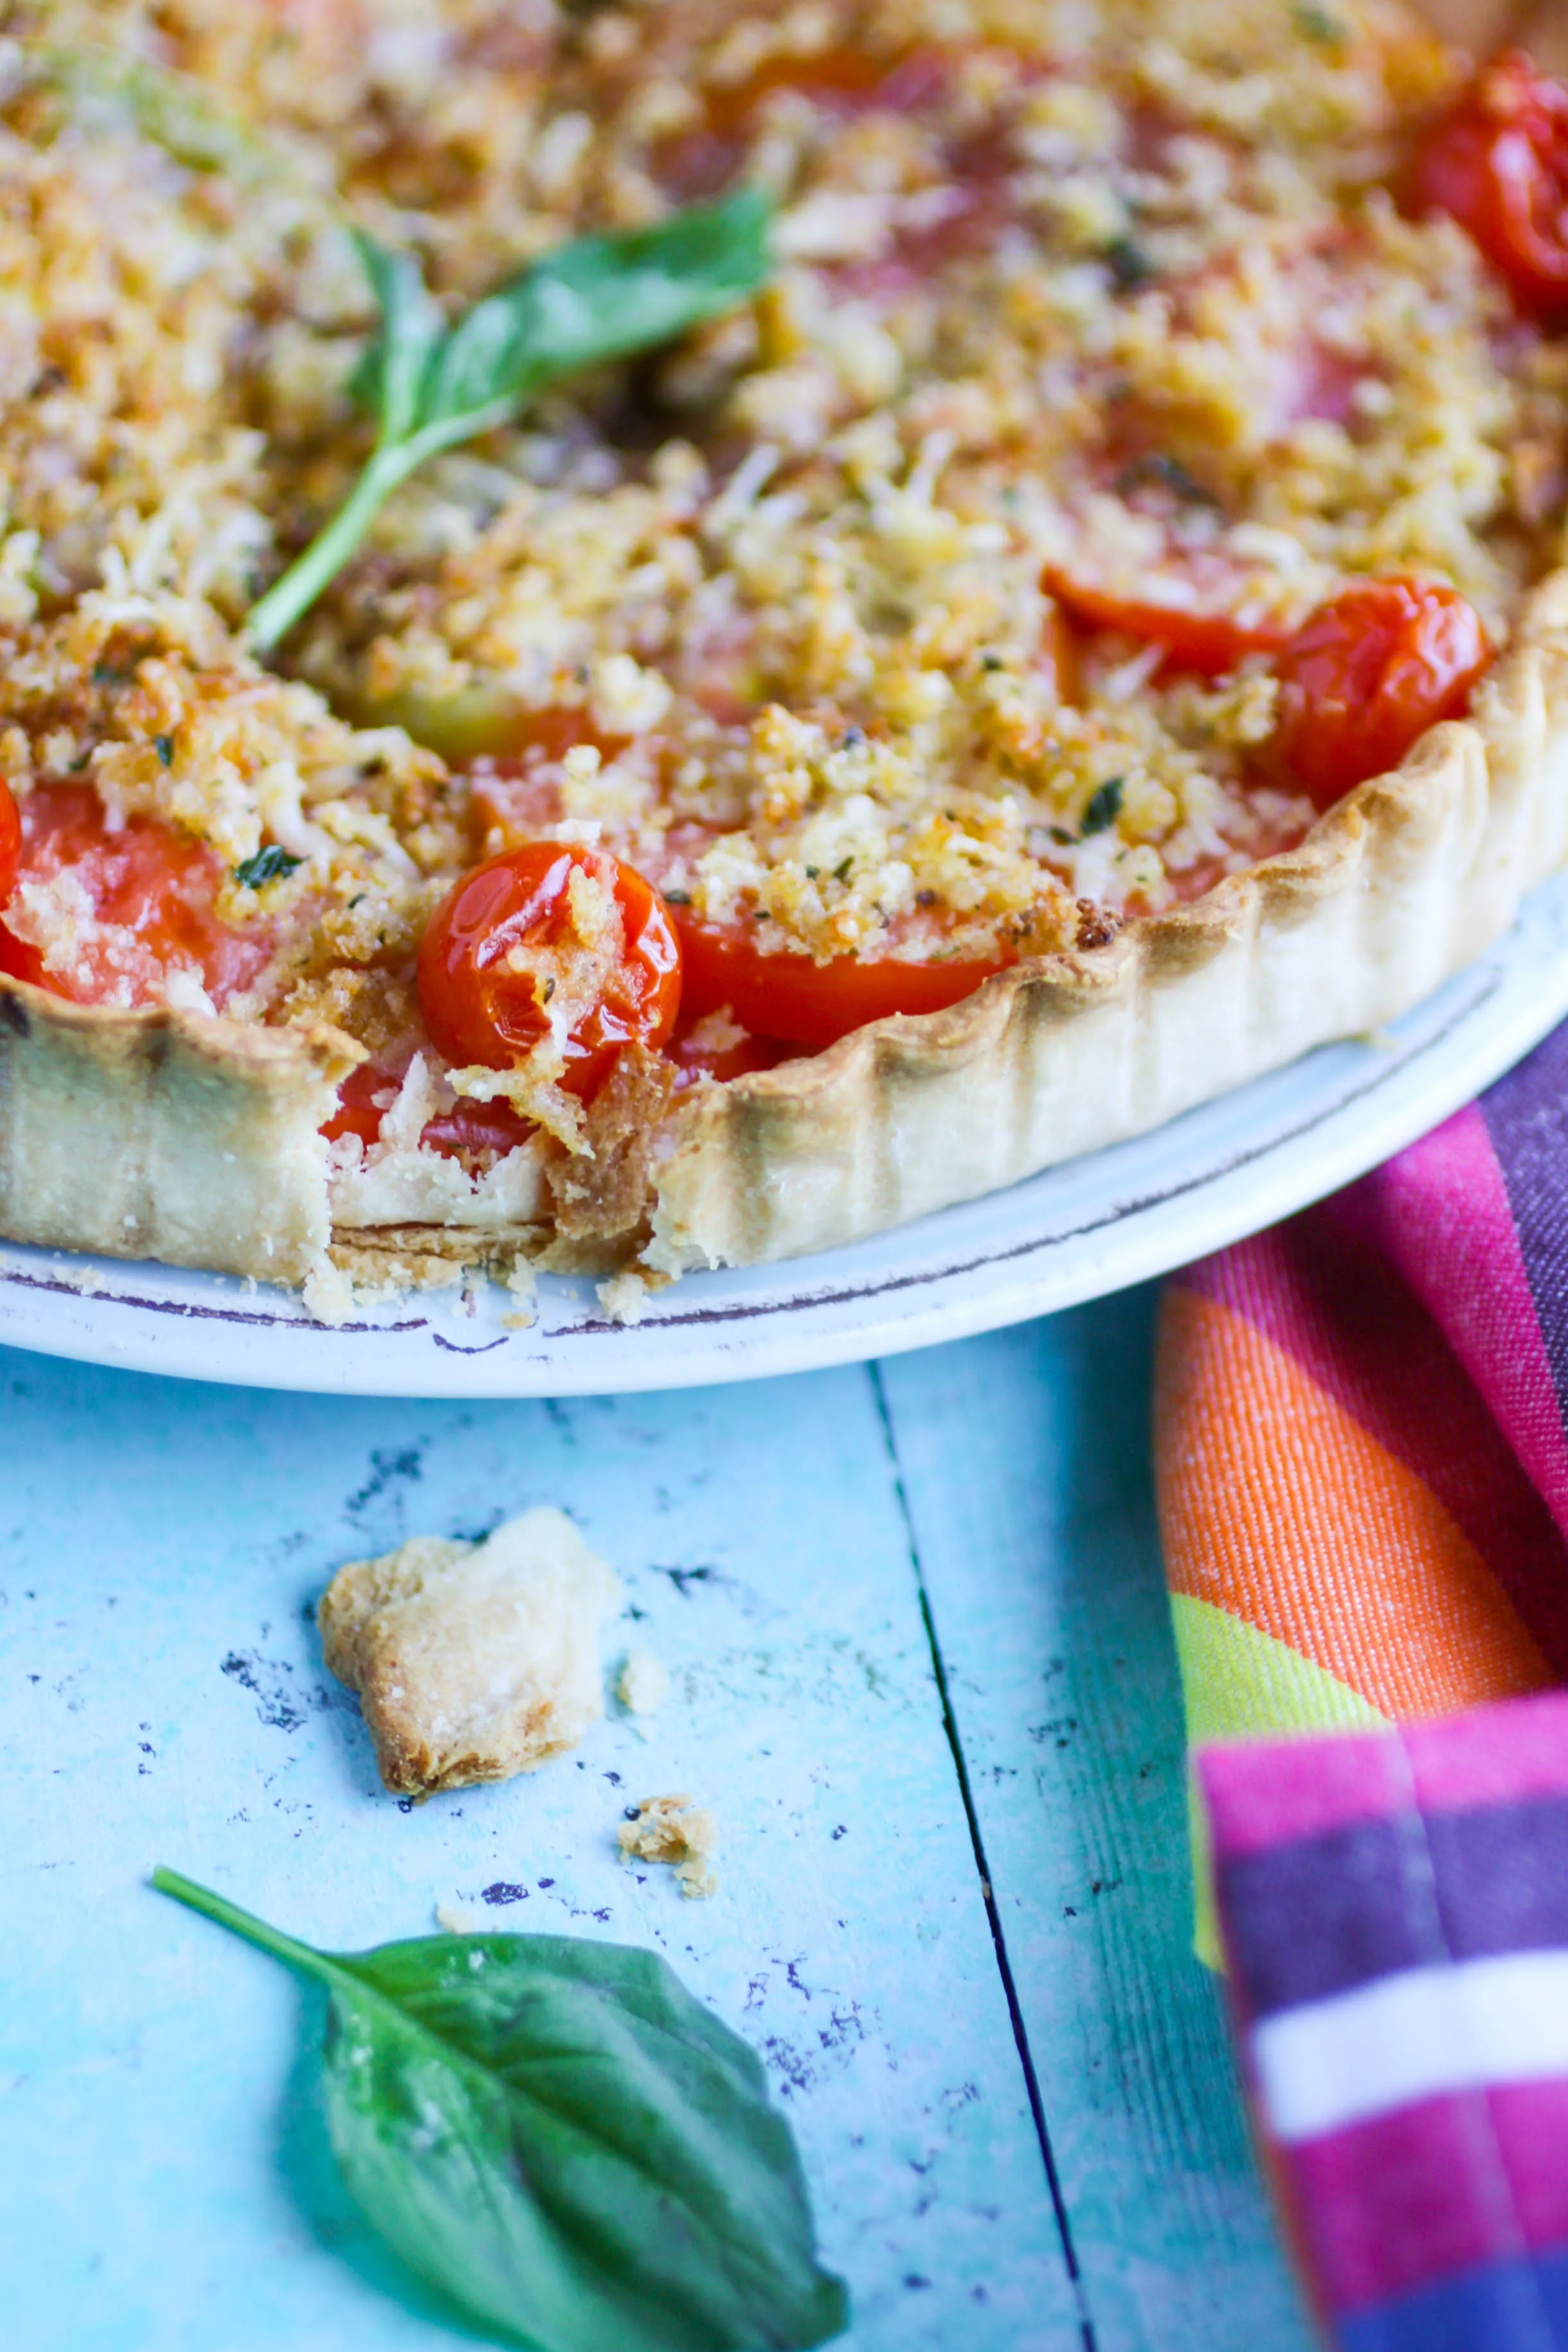 Tomato Tart with Cheesy Breadcrumbs makes a wonderful, seasonal starter or part of a light meal. Serve this meatless dish all summer long! 